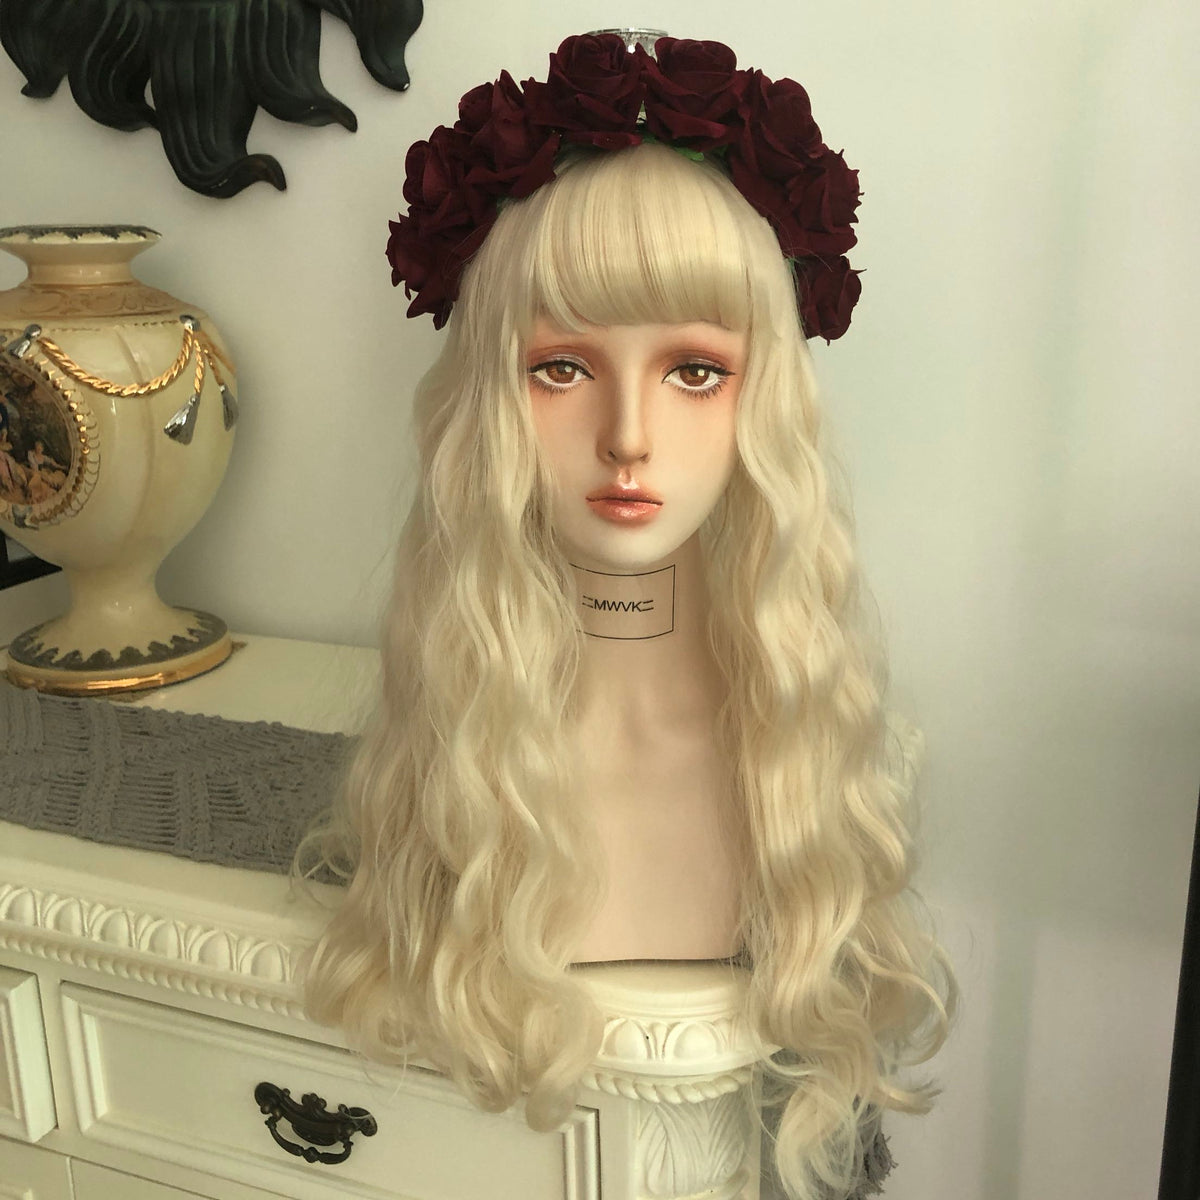 White long curly wig KF81264